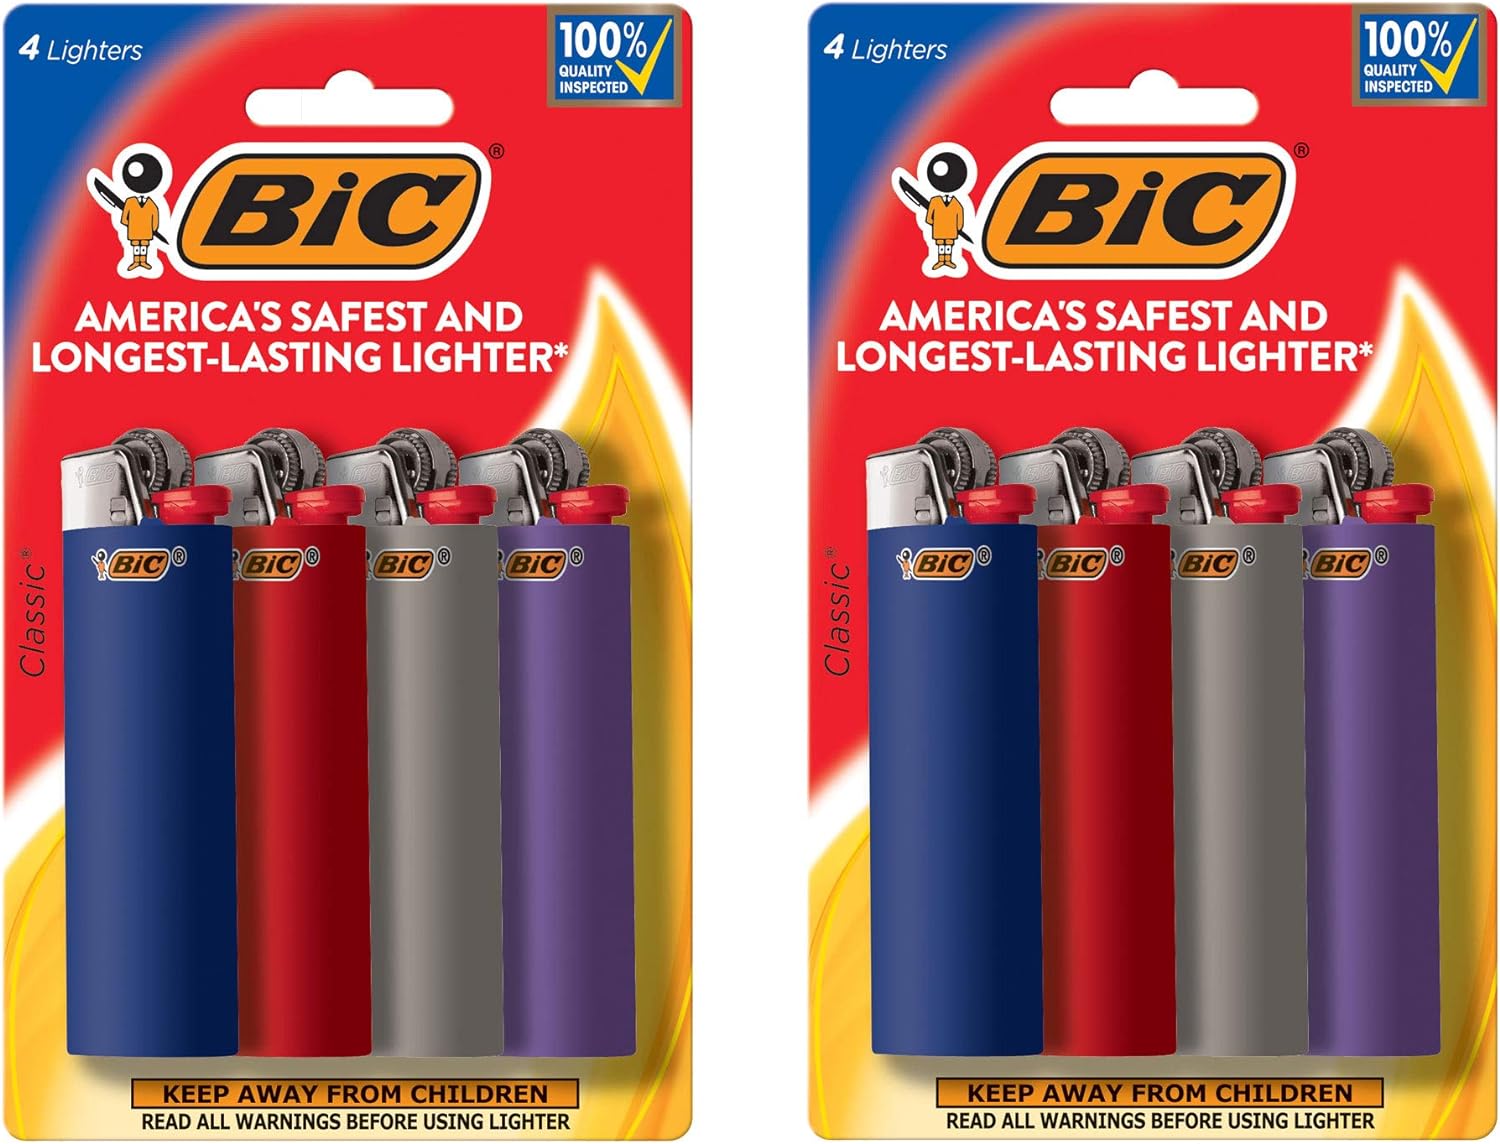 I was very happy to find this deal for 8 Bic lighters on Amazon.com. The price was right, and I didn't need to leave the house to shop for them on a single basis. Shipping was free and they arrived when promised.